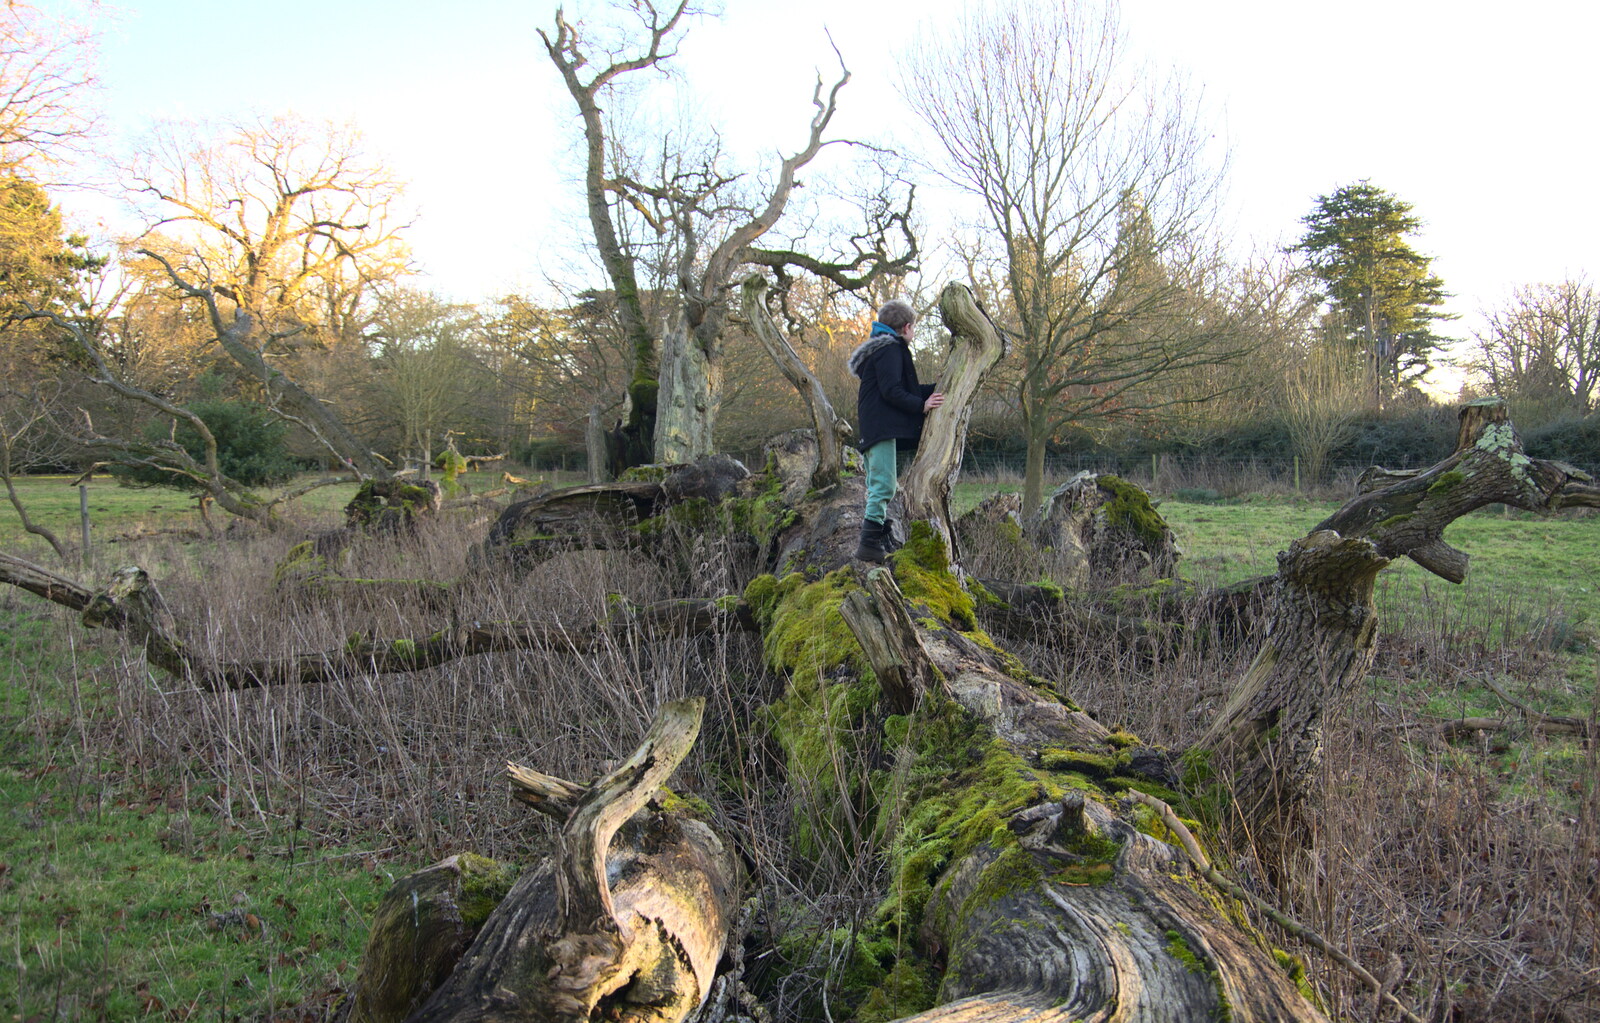 Fred explores a fallen tree from Life Below Stairs, Ickworth House, Horringer, Suffolk - 28th January 2018